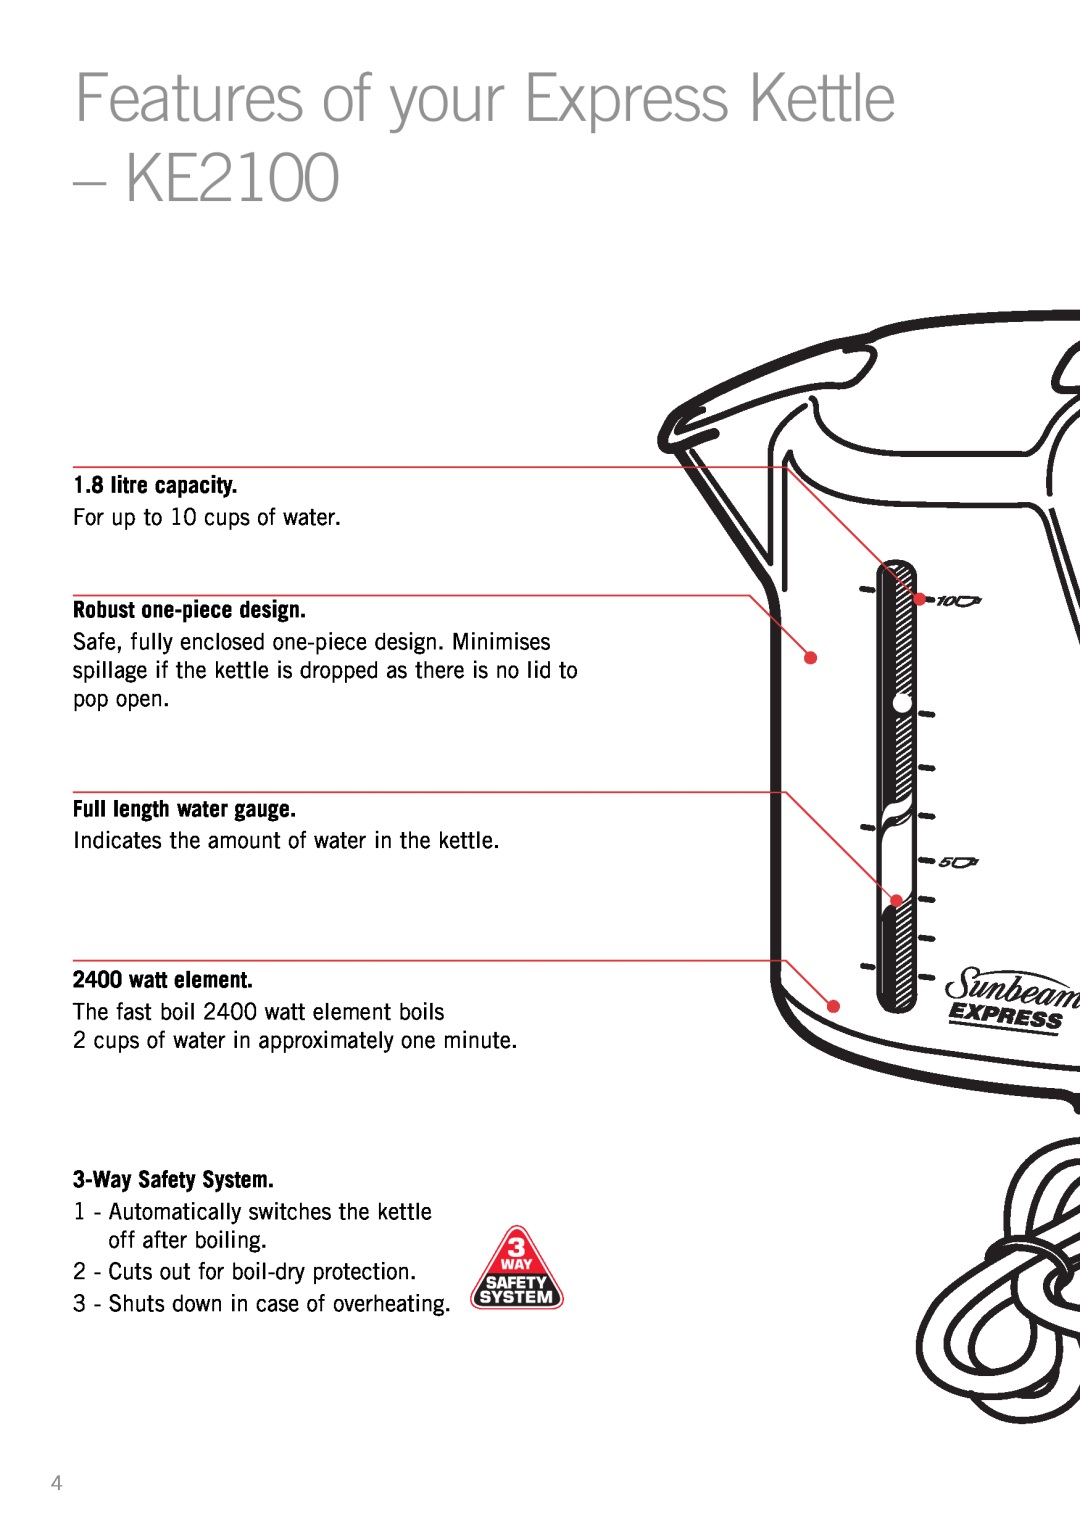 Sunbeam manual Features of your Express Kettle - KE2100, litre capacity, Robust one-piecedesign, Full length water gauge 